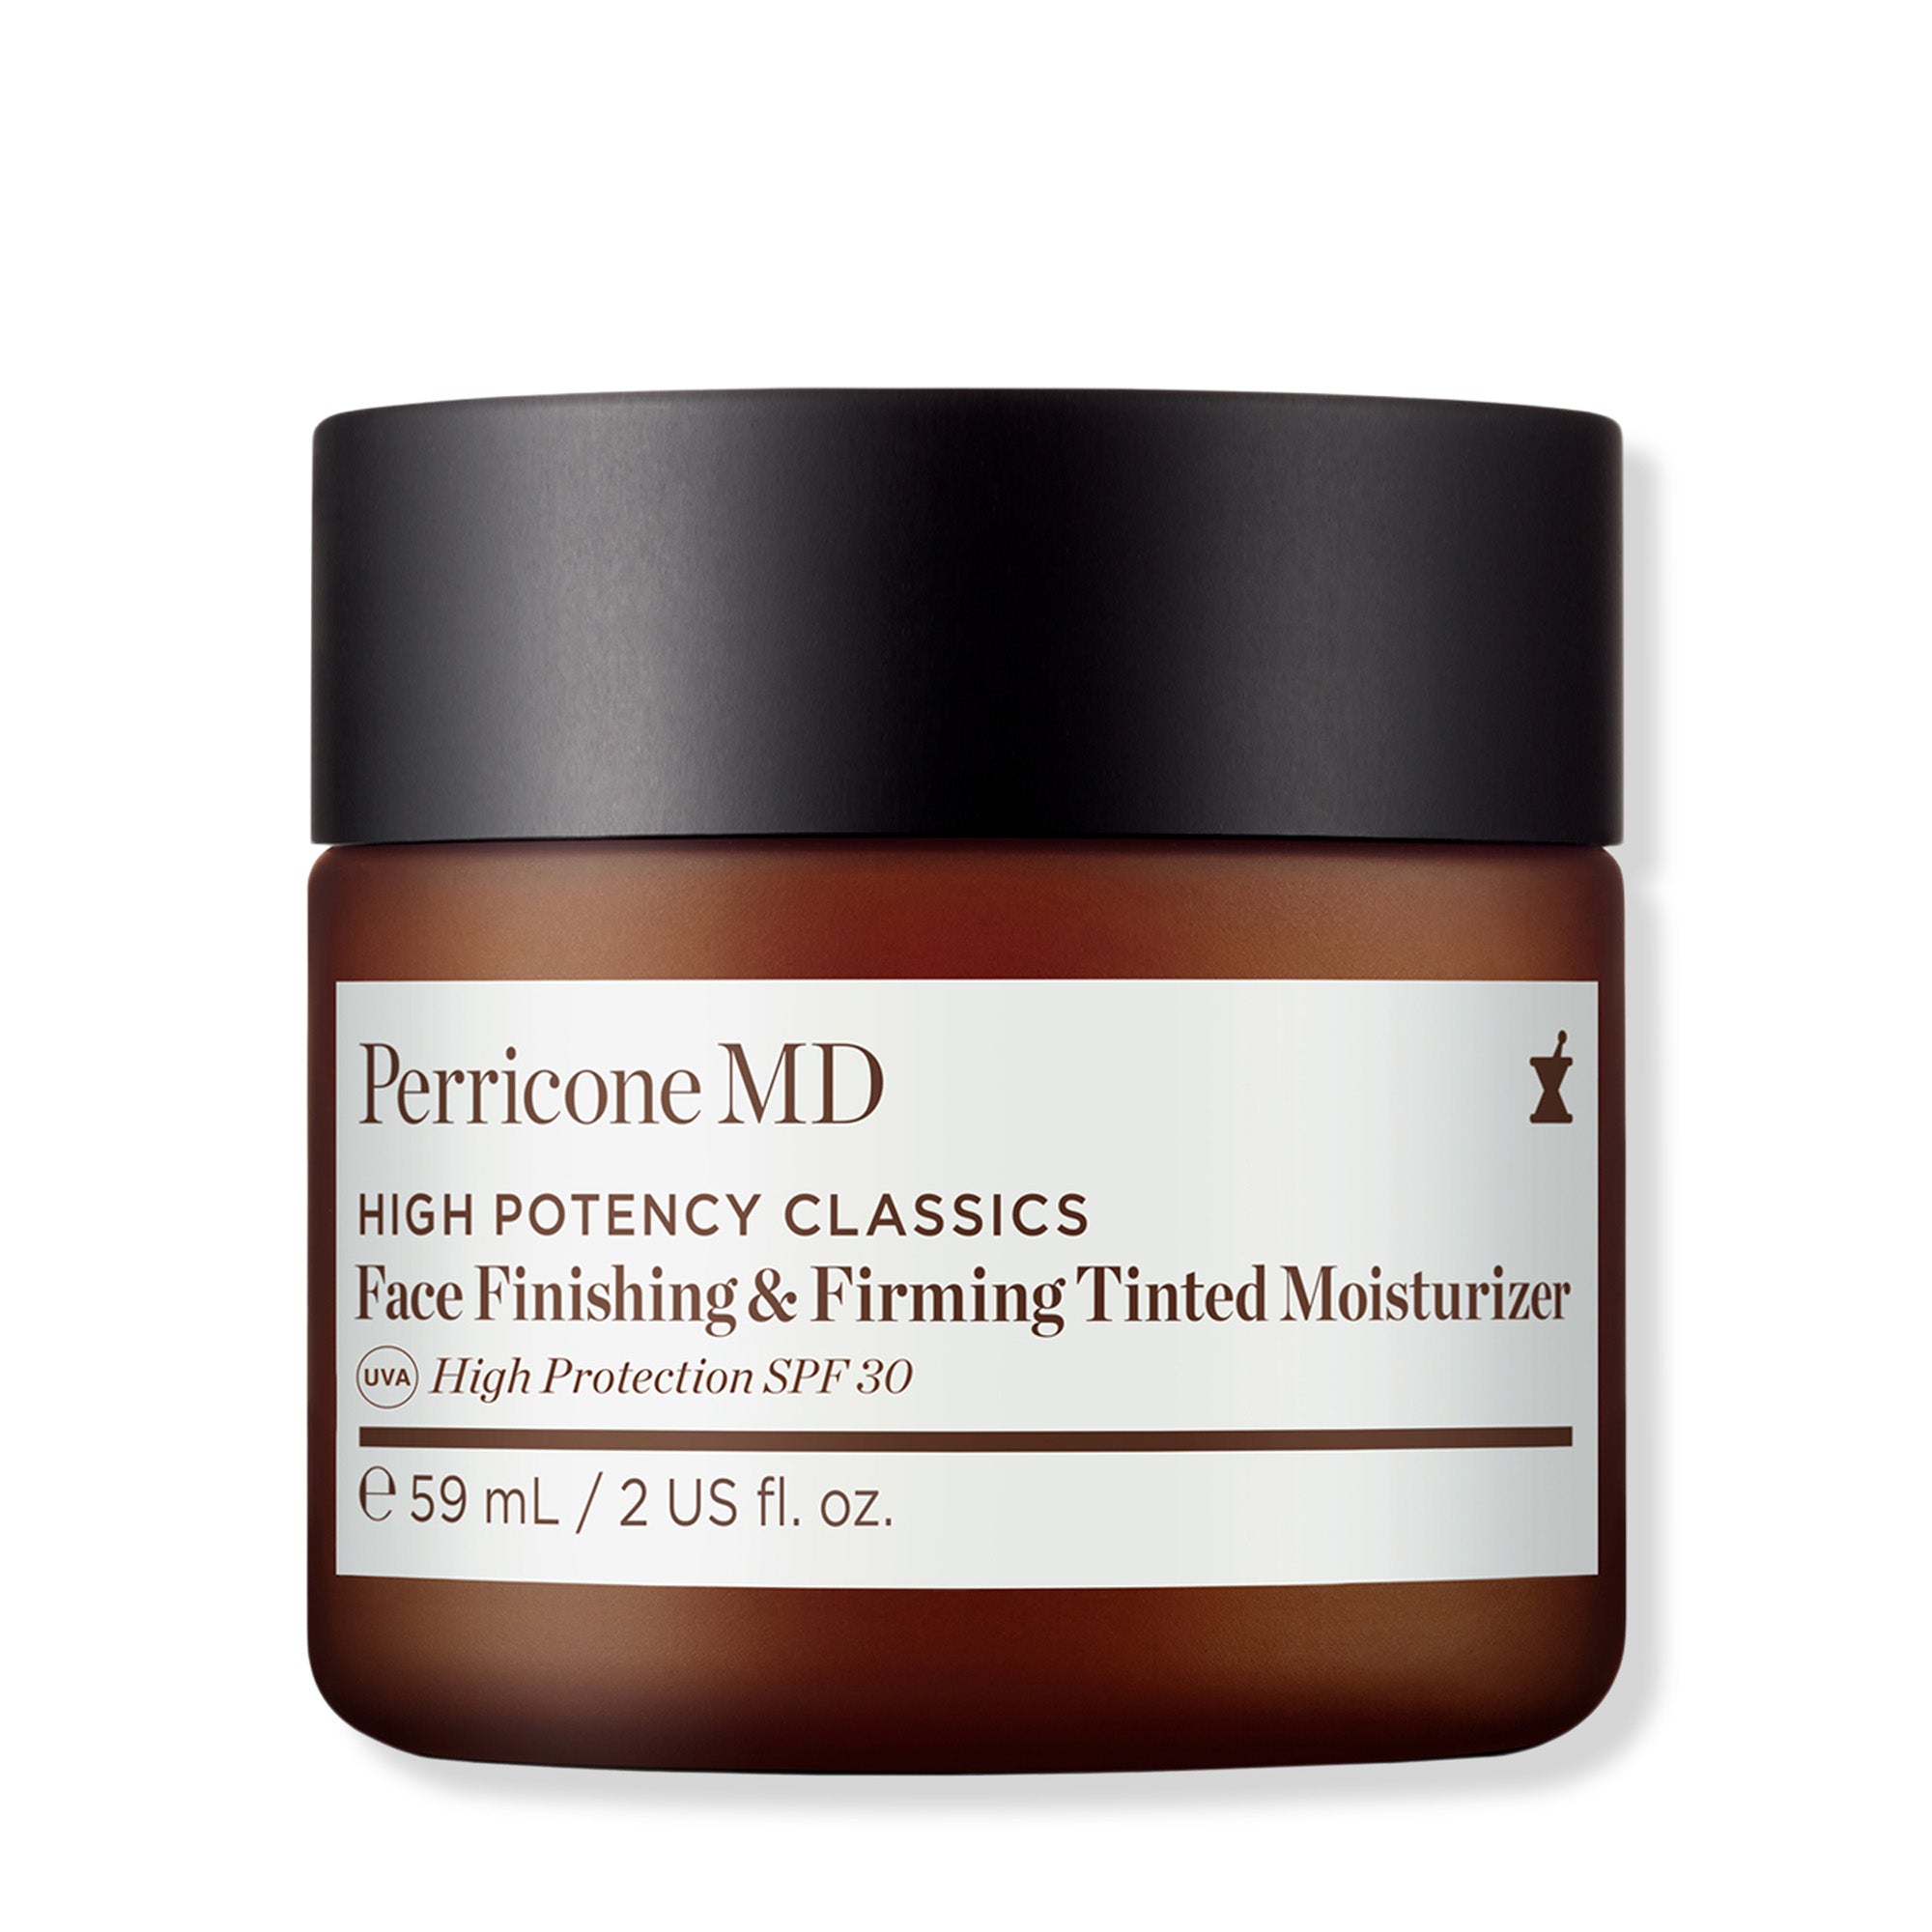 Perricone MD High Potency Classics Face Finishing & Firming Tinted Moisturizer Broad Spectrum SPF 30 / 2OZ